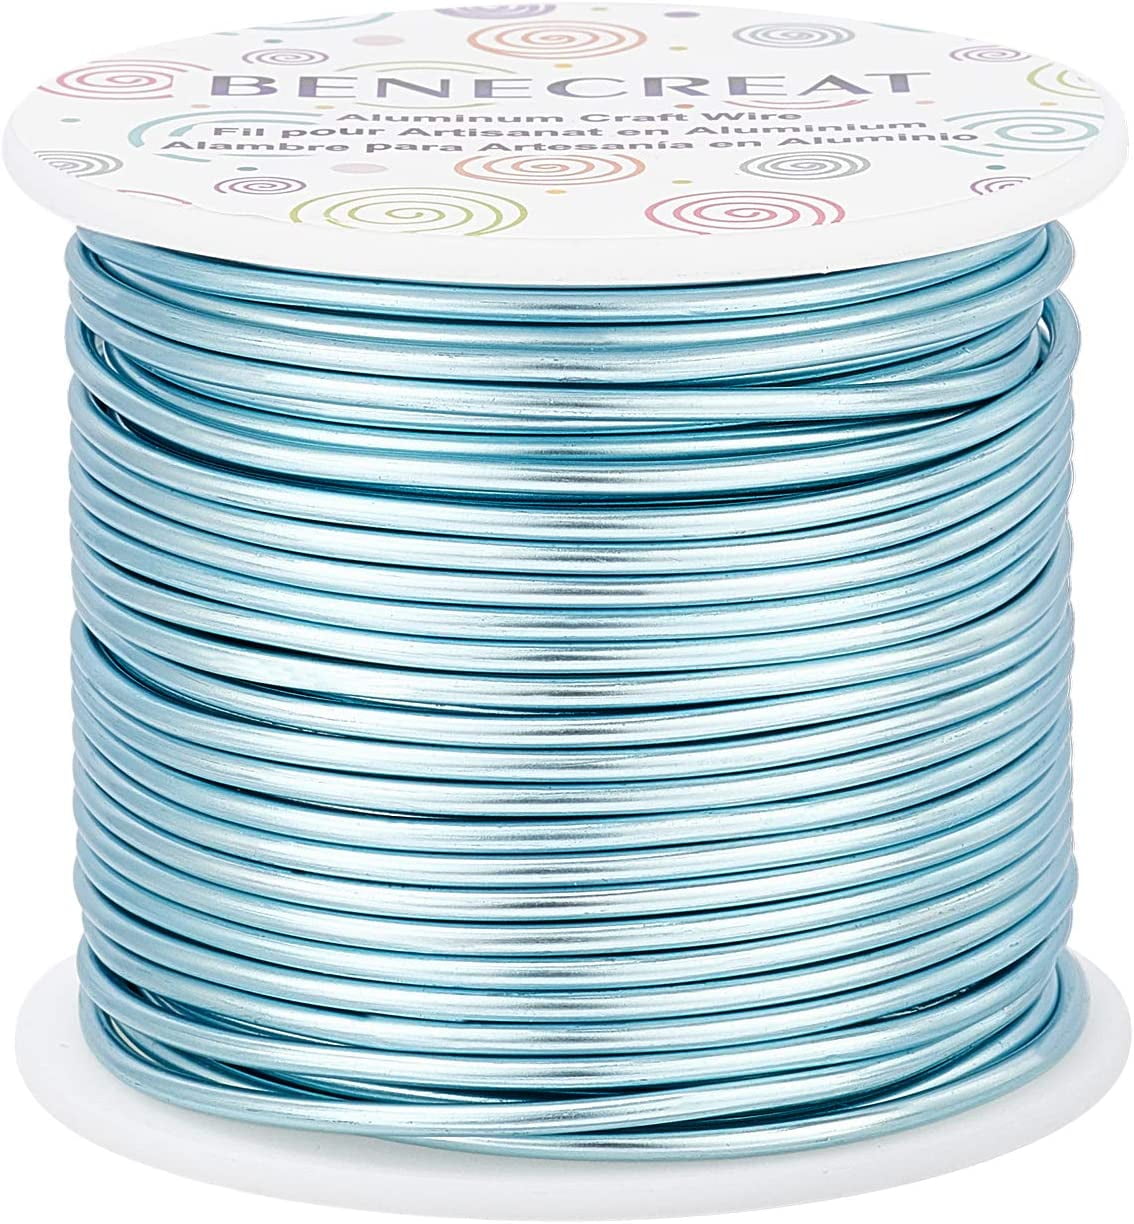 12 Gauge 100FT Tarnish Resistant Jewelry Craft Wire Bendable Aluminum  Sculpting Metal Wire for Jewelry Craft Beading Work LightBlue 